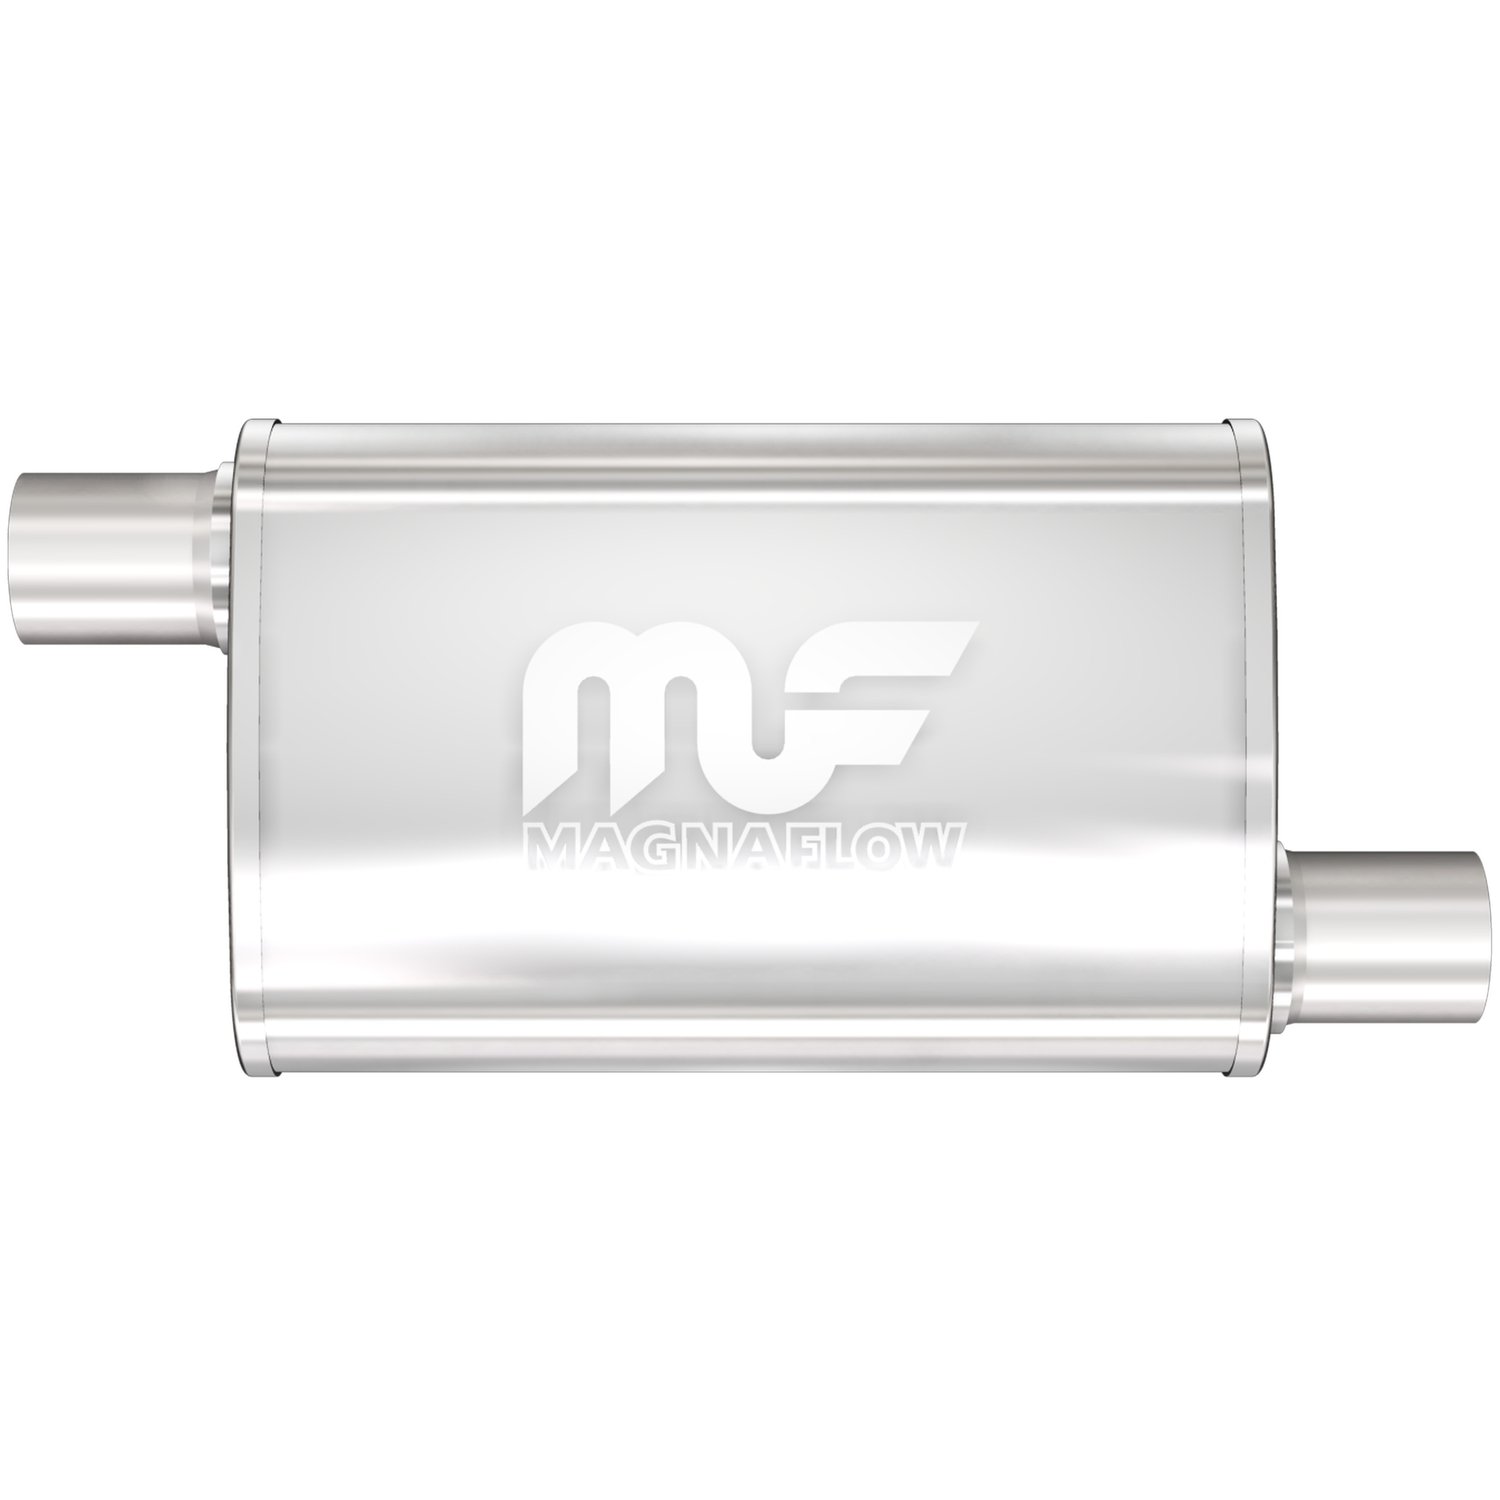 4" x 9" Oval Muffler Offset In/Offset Out: 2.25"/2.25" Body Length: 18" Overall Length: 24" Core Size: 2.5" Satin Finish